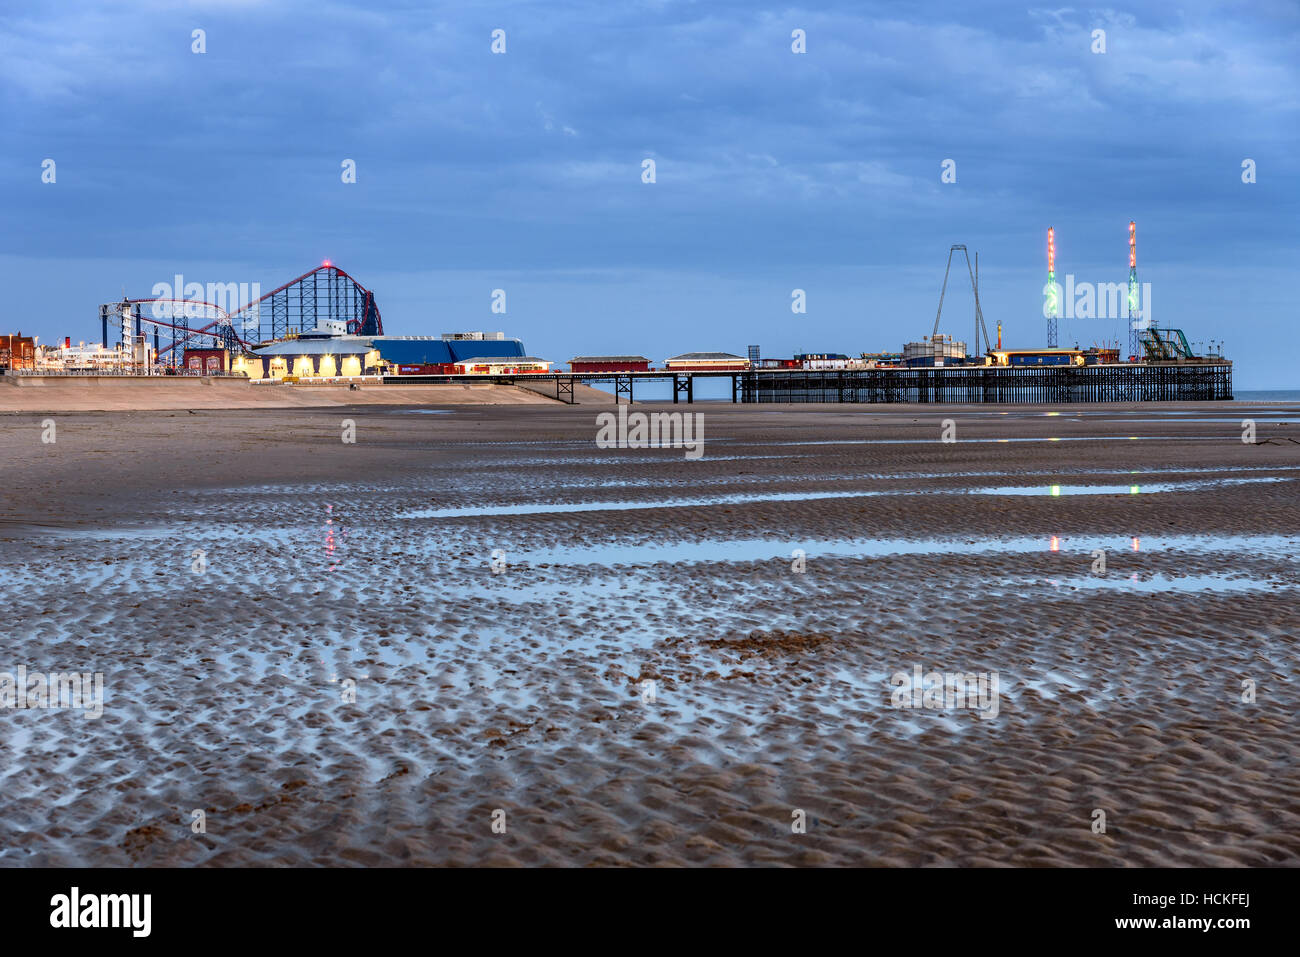 Blackpool Pleasure Beach commonly referred to as Pleasure Beach Resort is an amusement park situated along the Fylde coast. Stock Photo